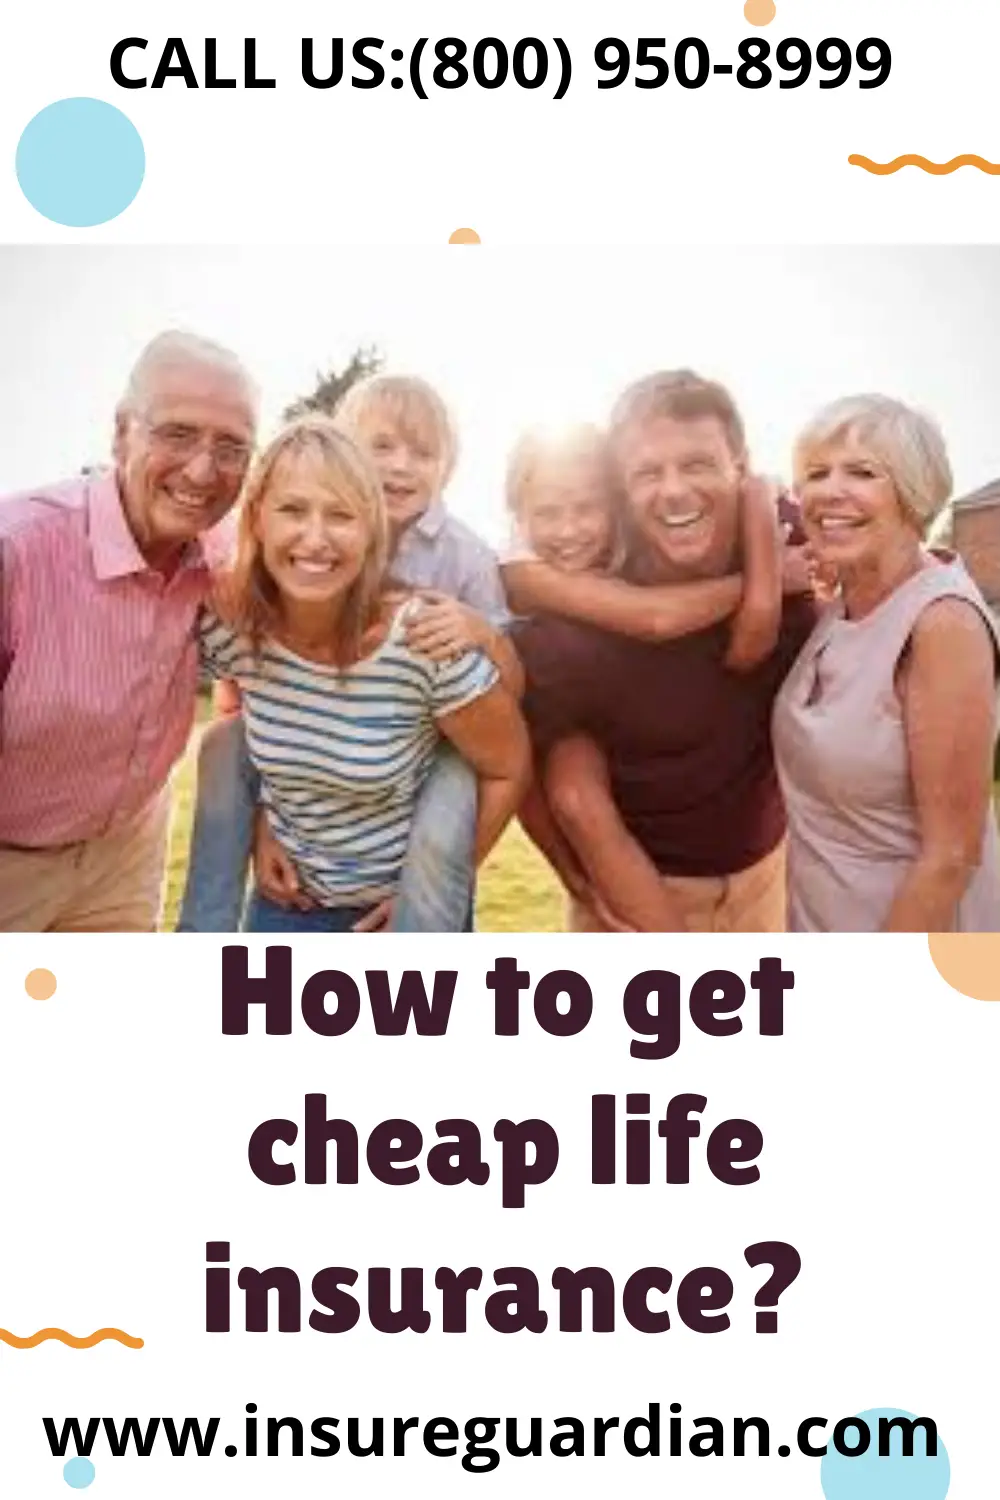 How To Get Cheap Life Insurance?